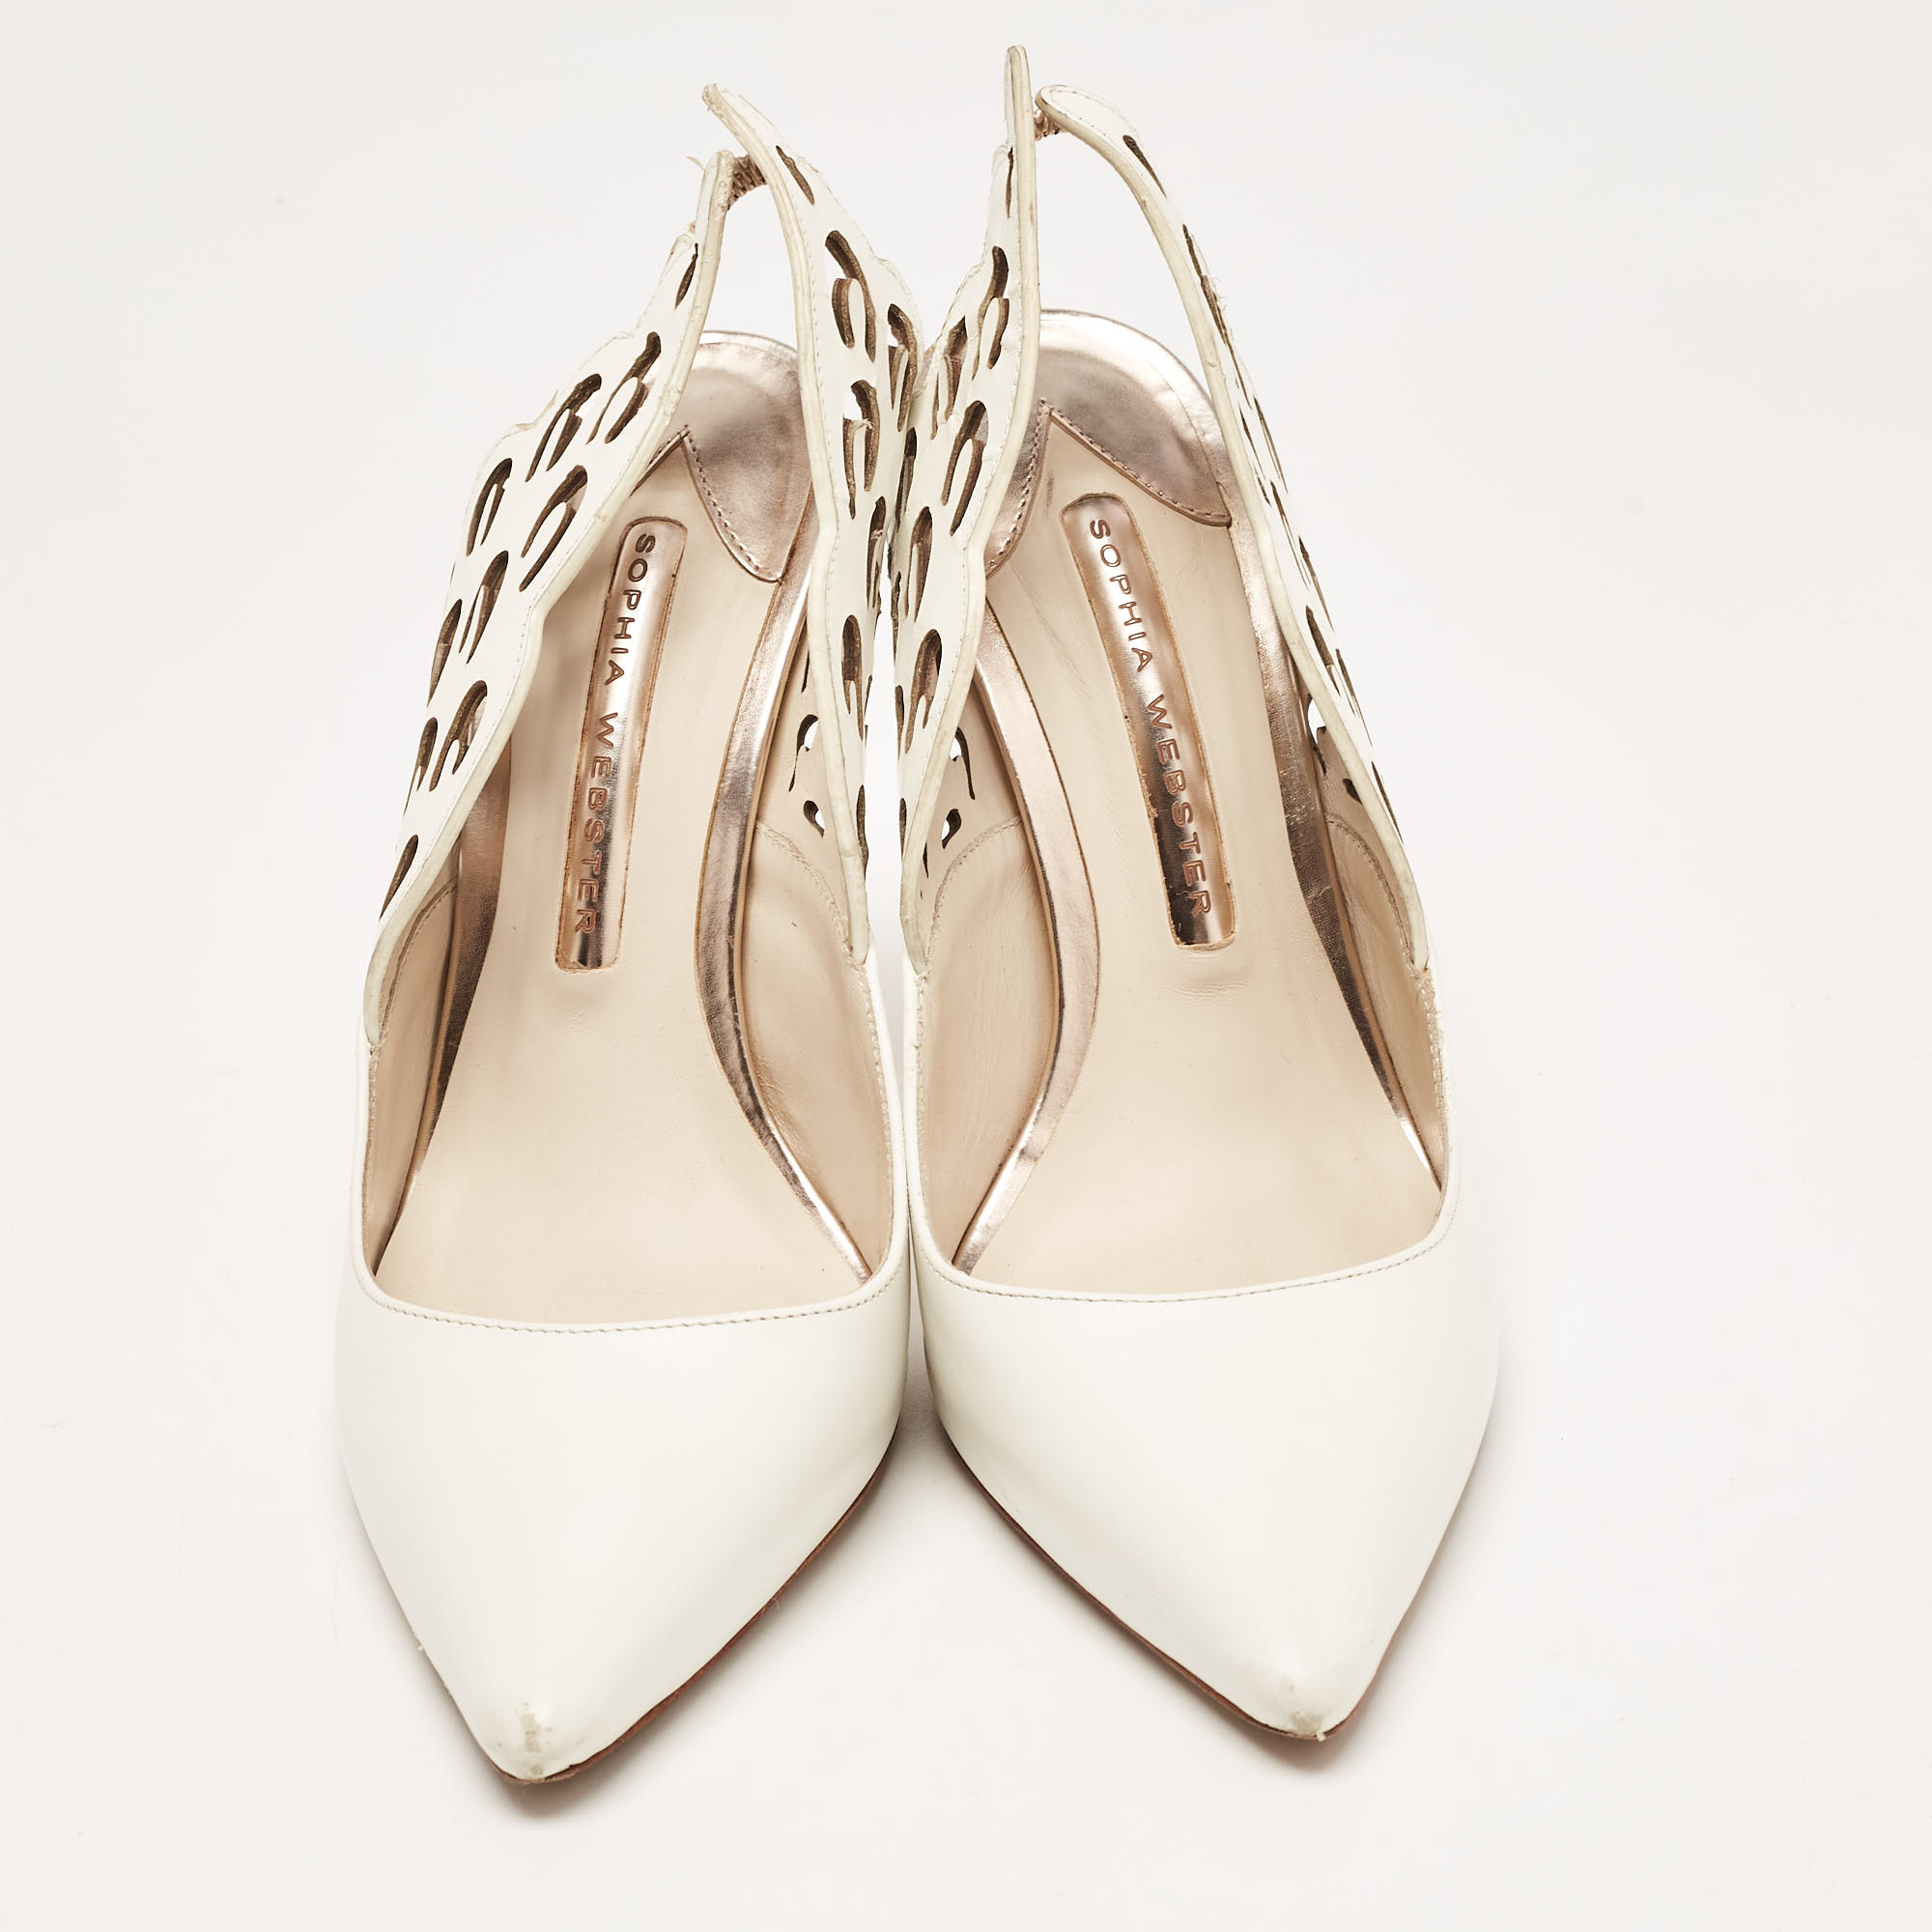 Sophia Webster White Leather Angelo Pointed Toe Slingback Pumps Size 36